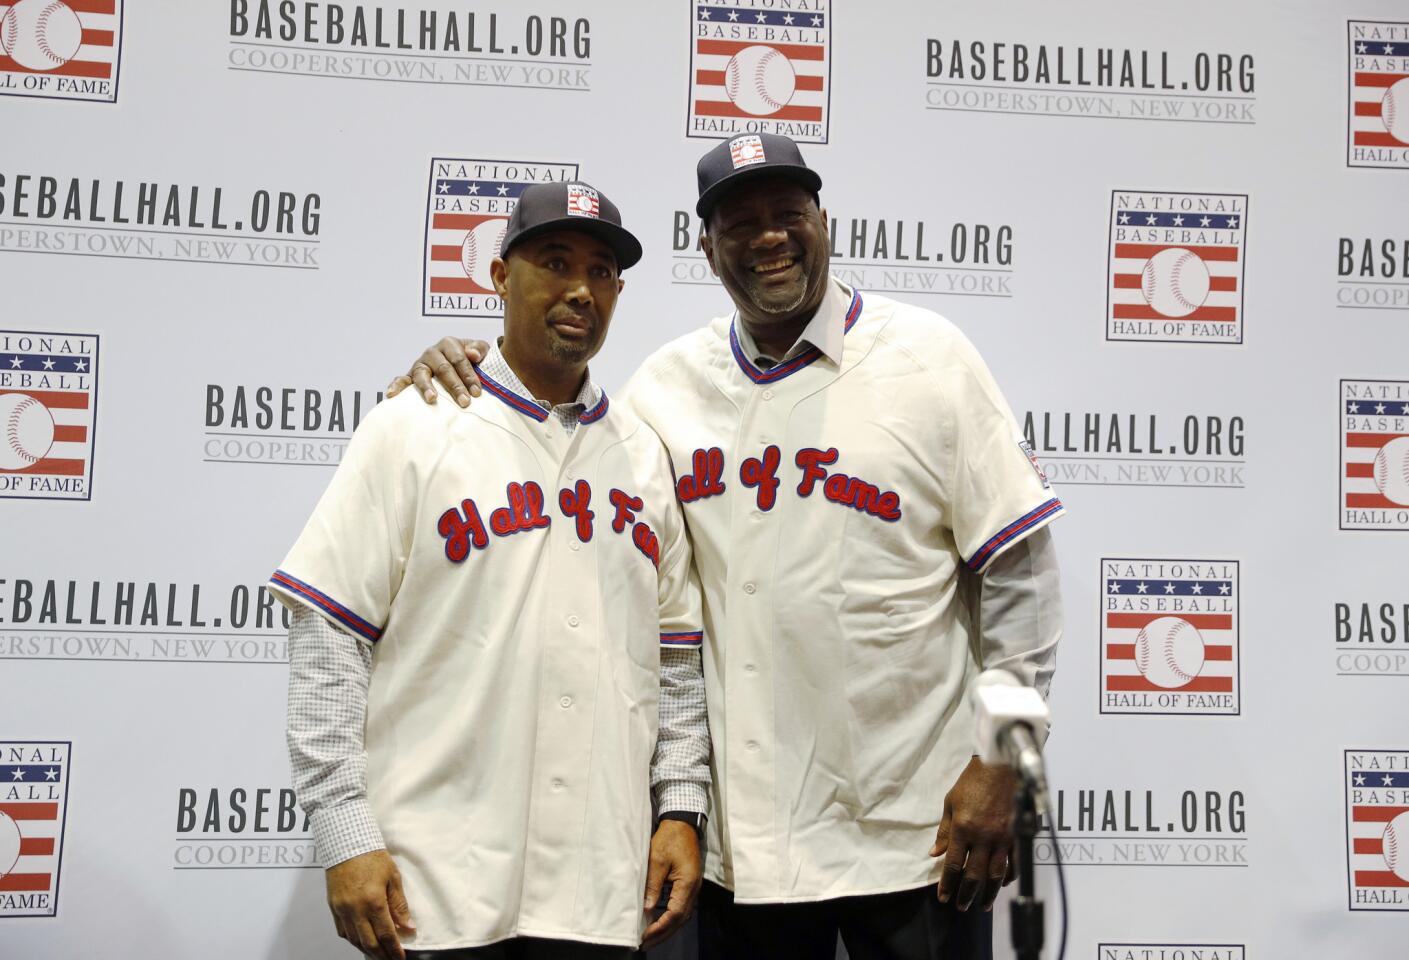 Lee Smith, right, and Harold Baines pose for photographers during a news conference announcng the Hall of Fame at the winter meetings in Las Vegas on Dec. 10, 2018.